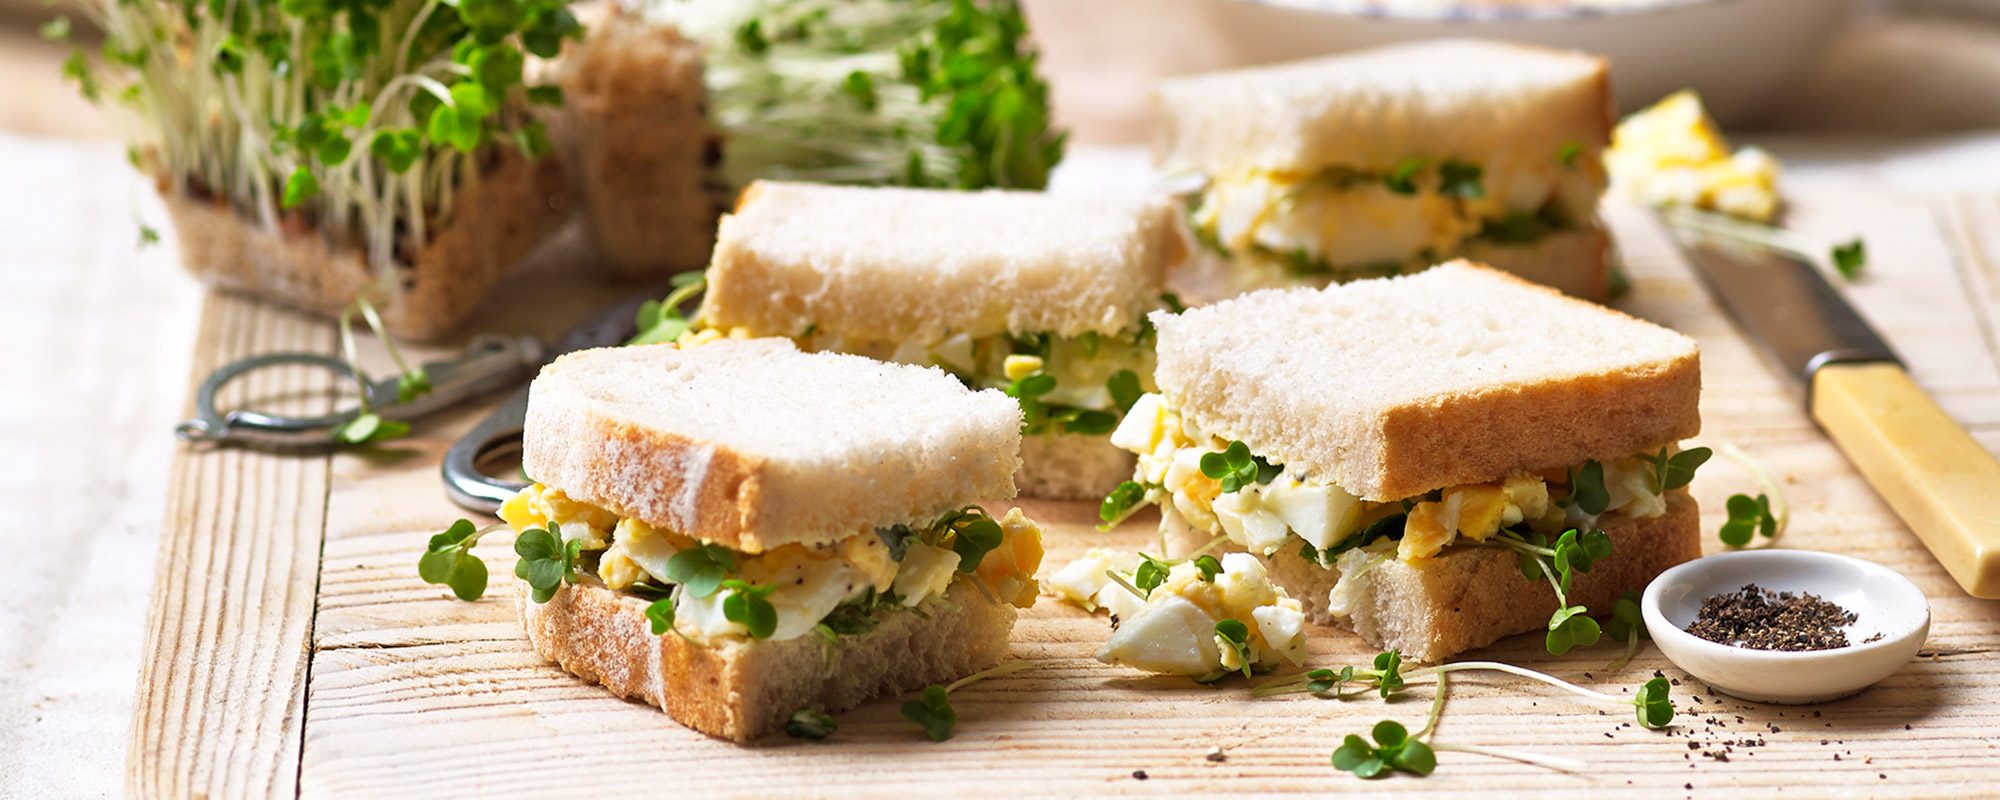 Egg and cress sandwich